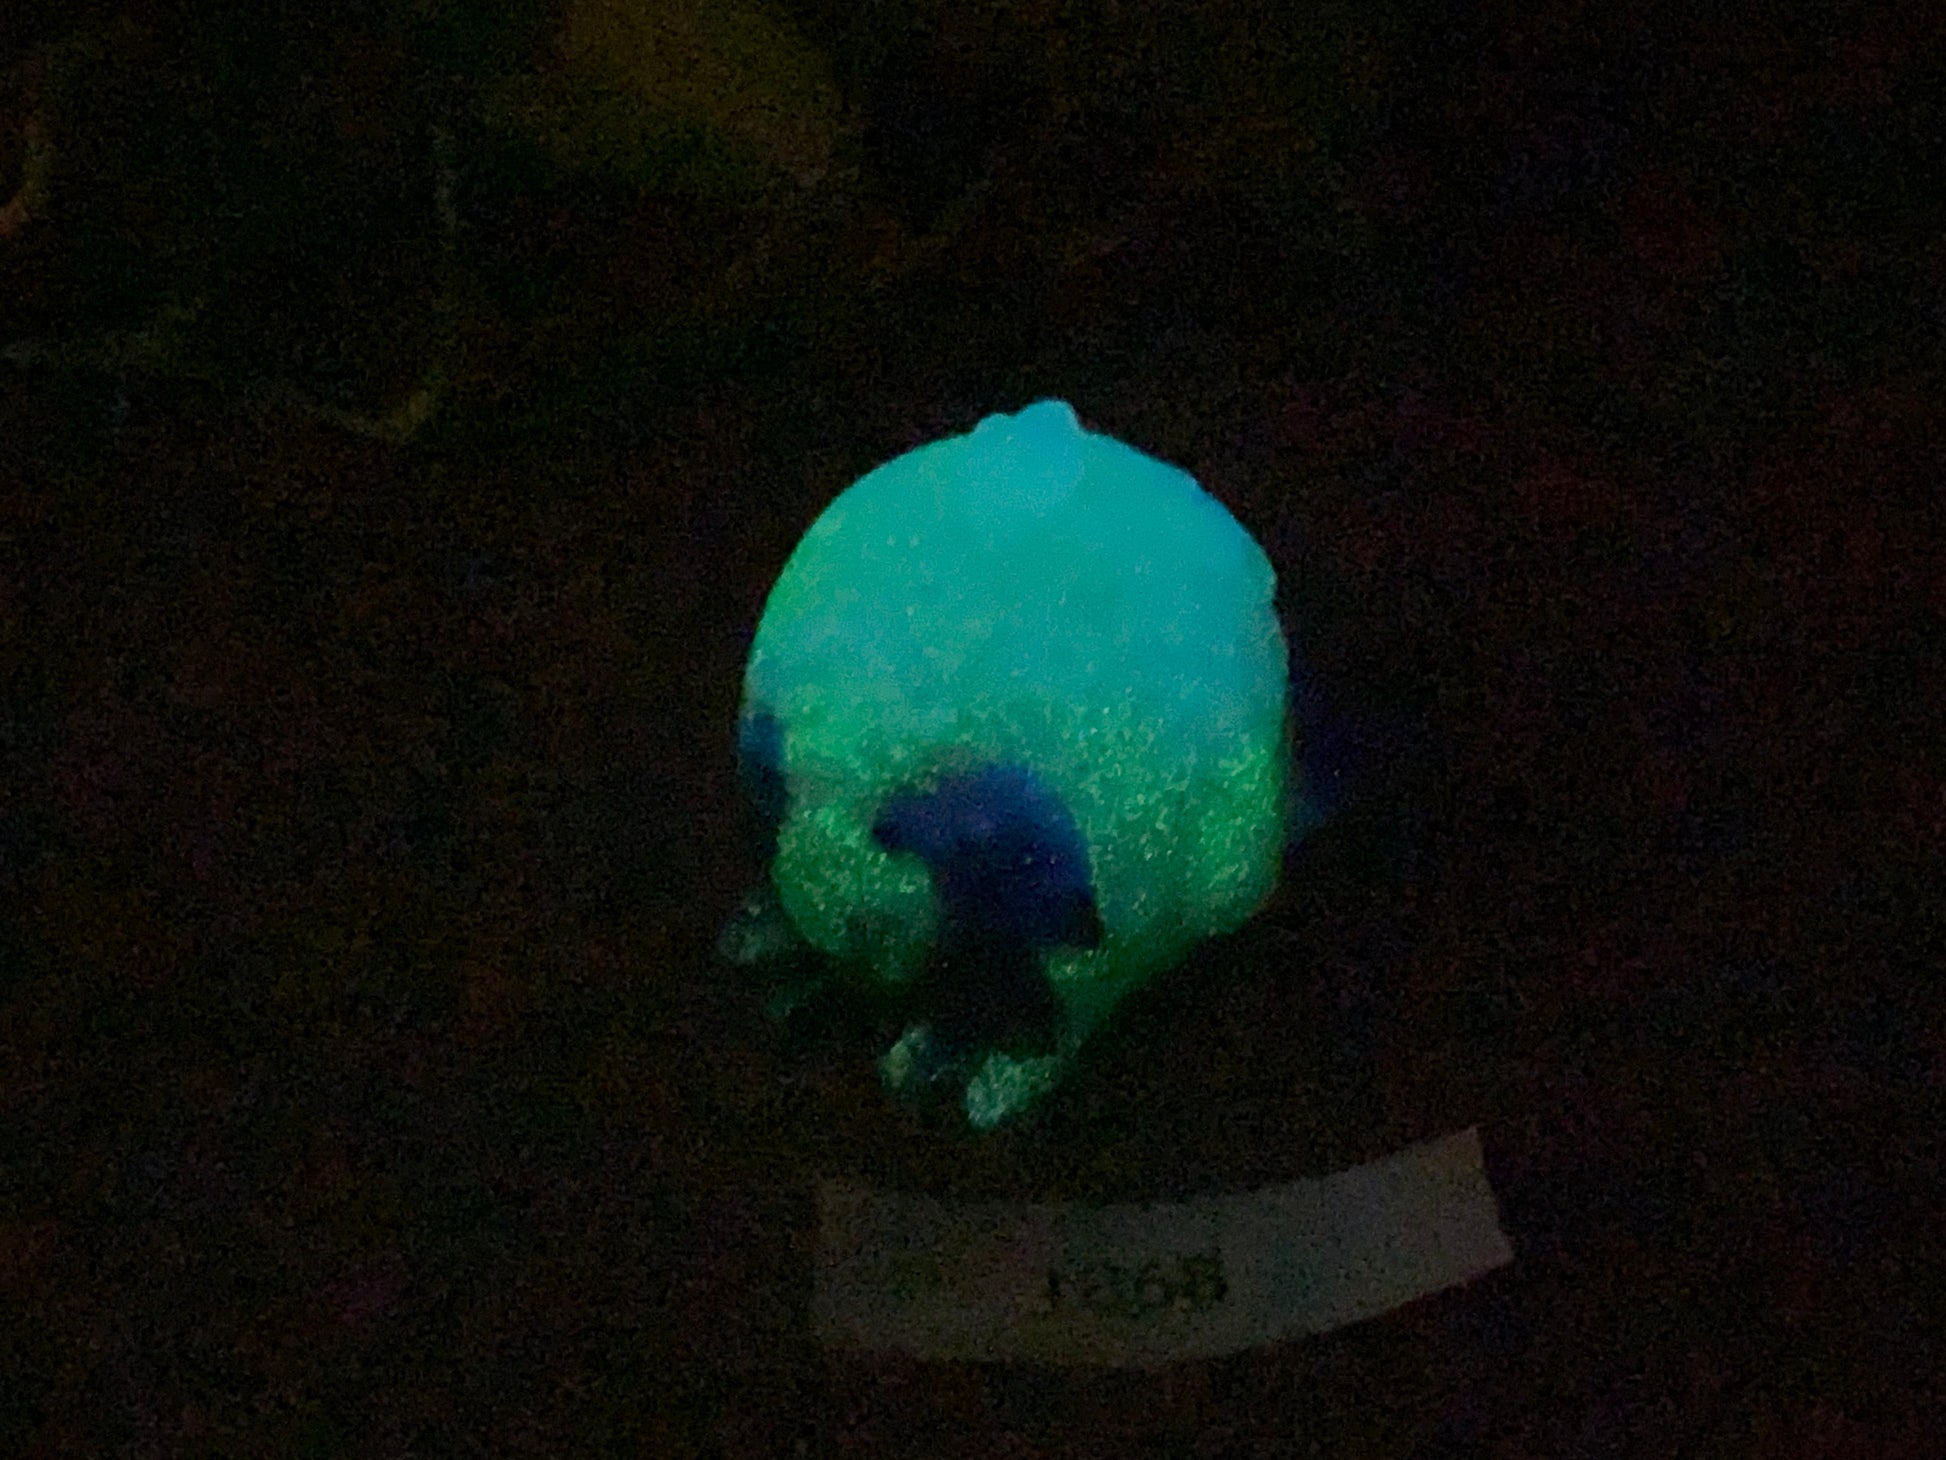 a glowing object in the dark on the ground